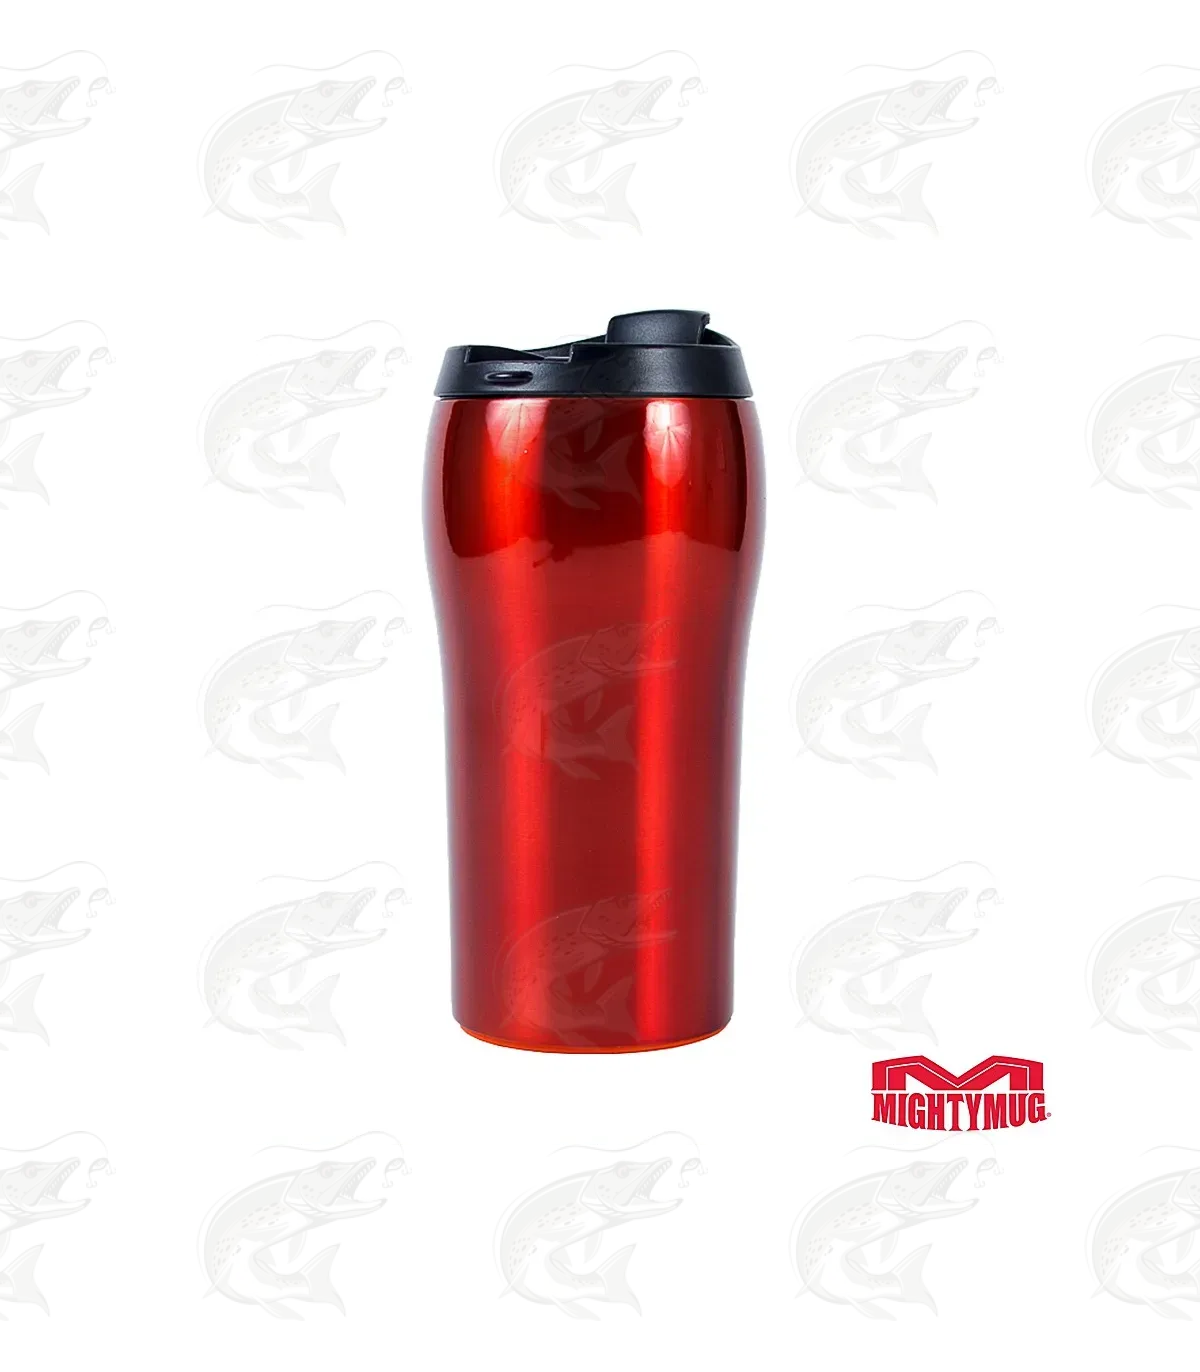 https://media.pro-fishing.eu/2580-superlarge_default_2x/mighty-mug-solo-ss-stainless-steel-red.jpg